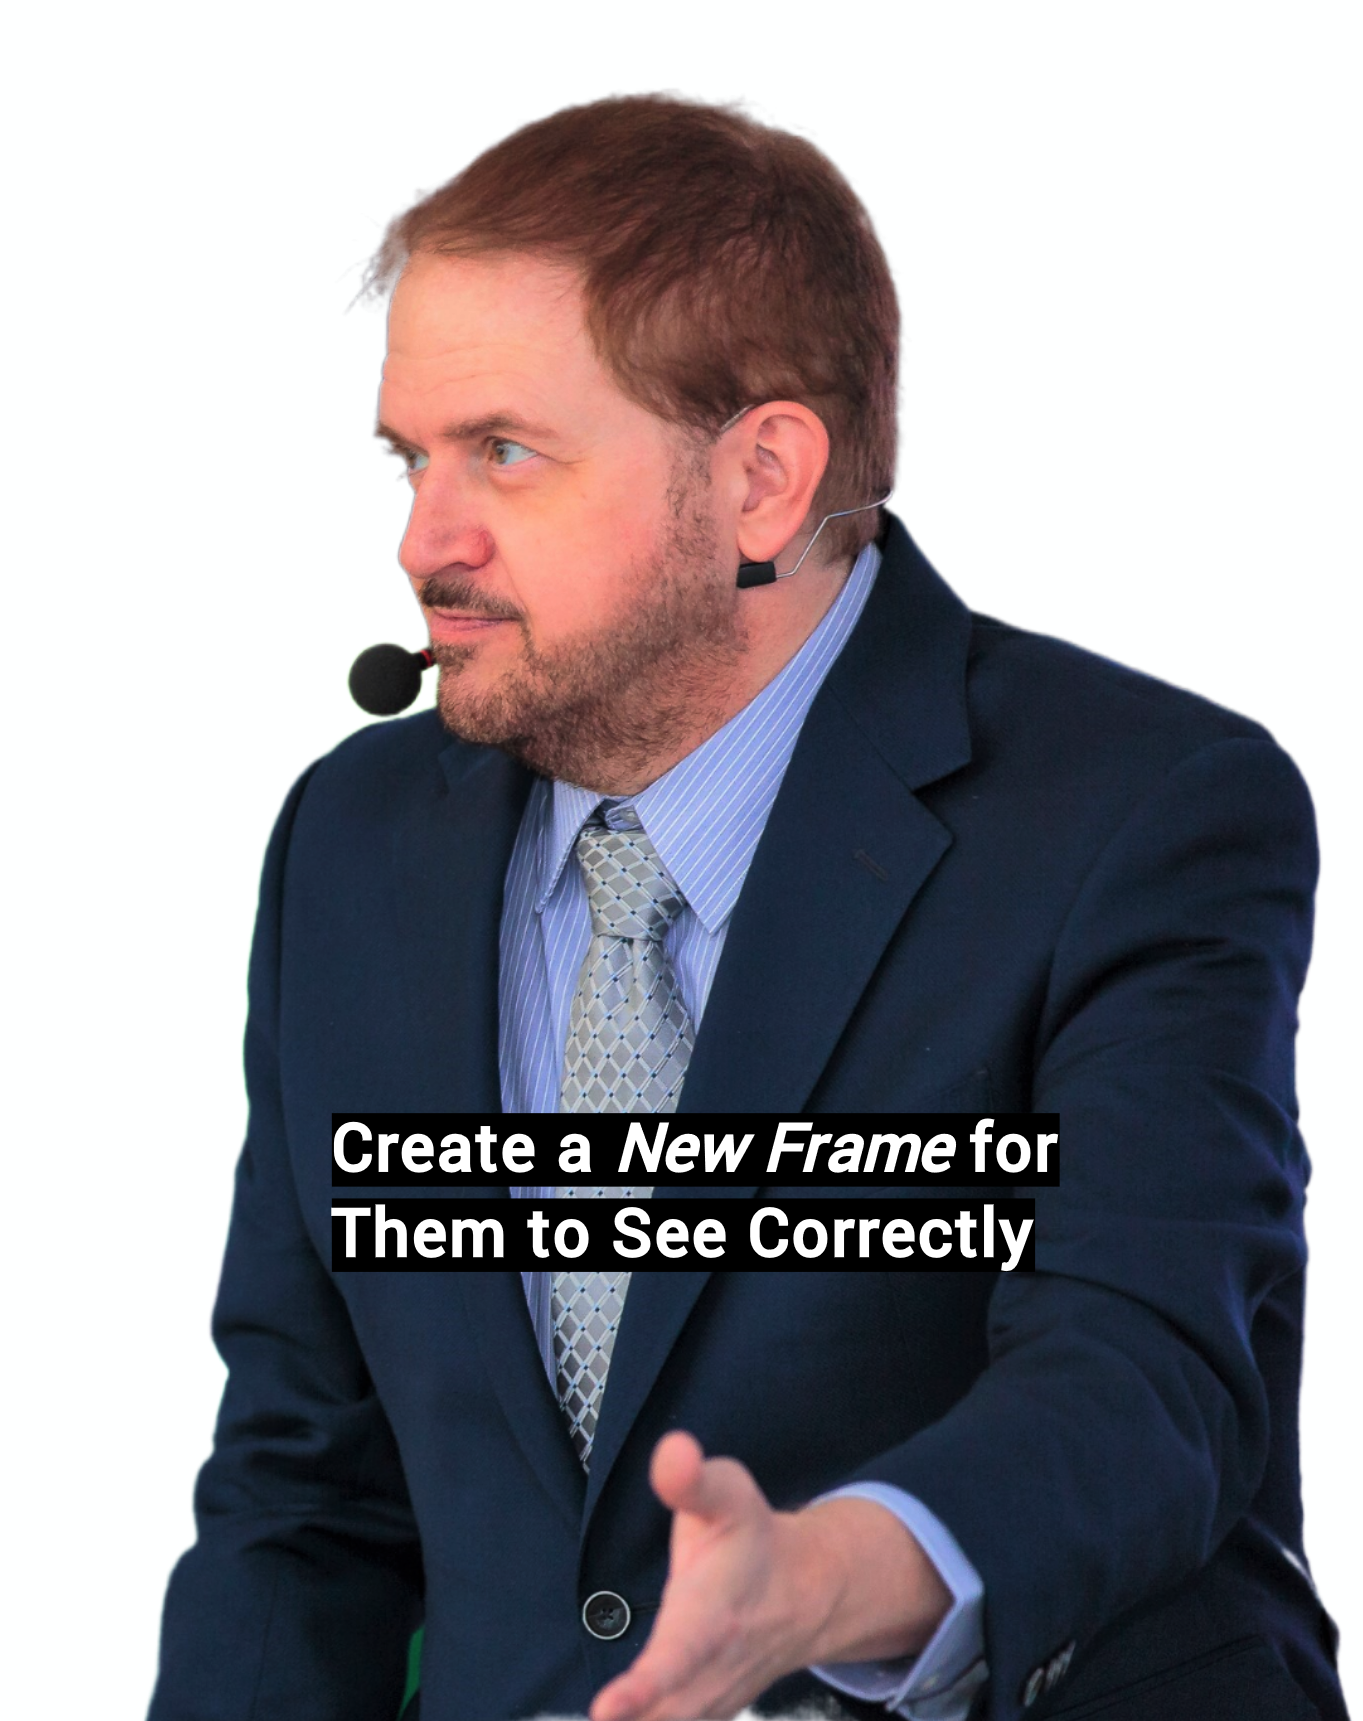 Learn to Reframe, istockphoto